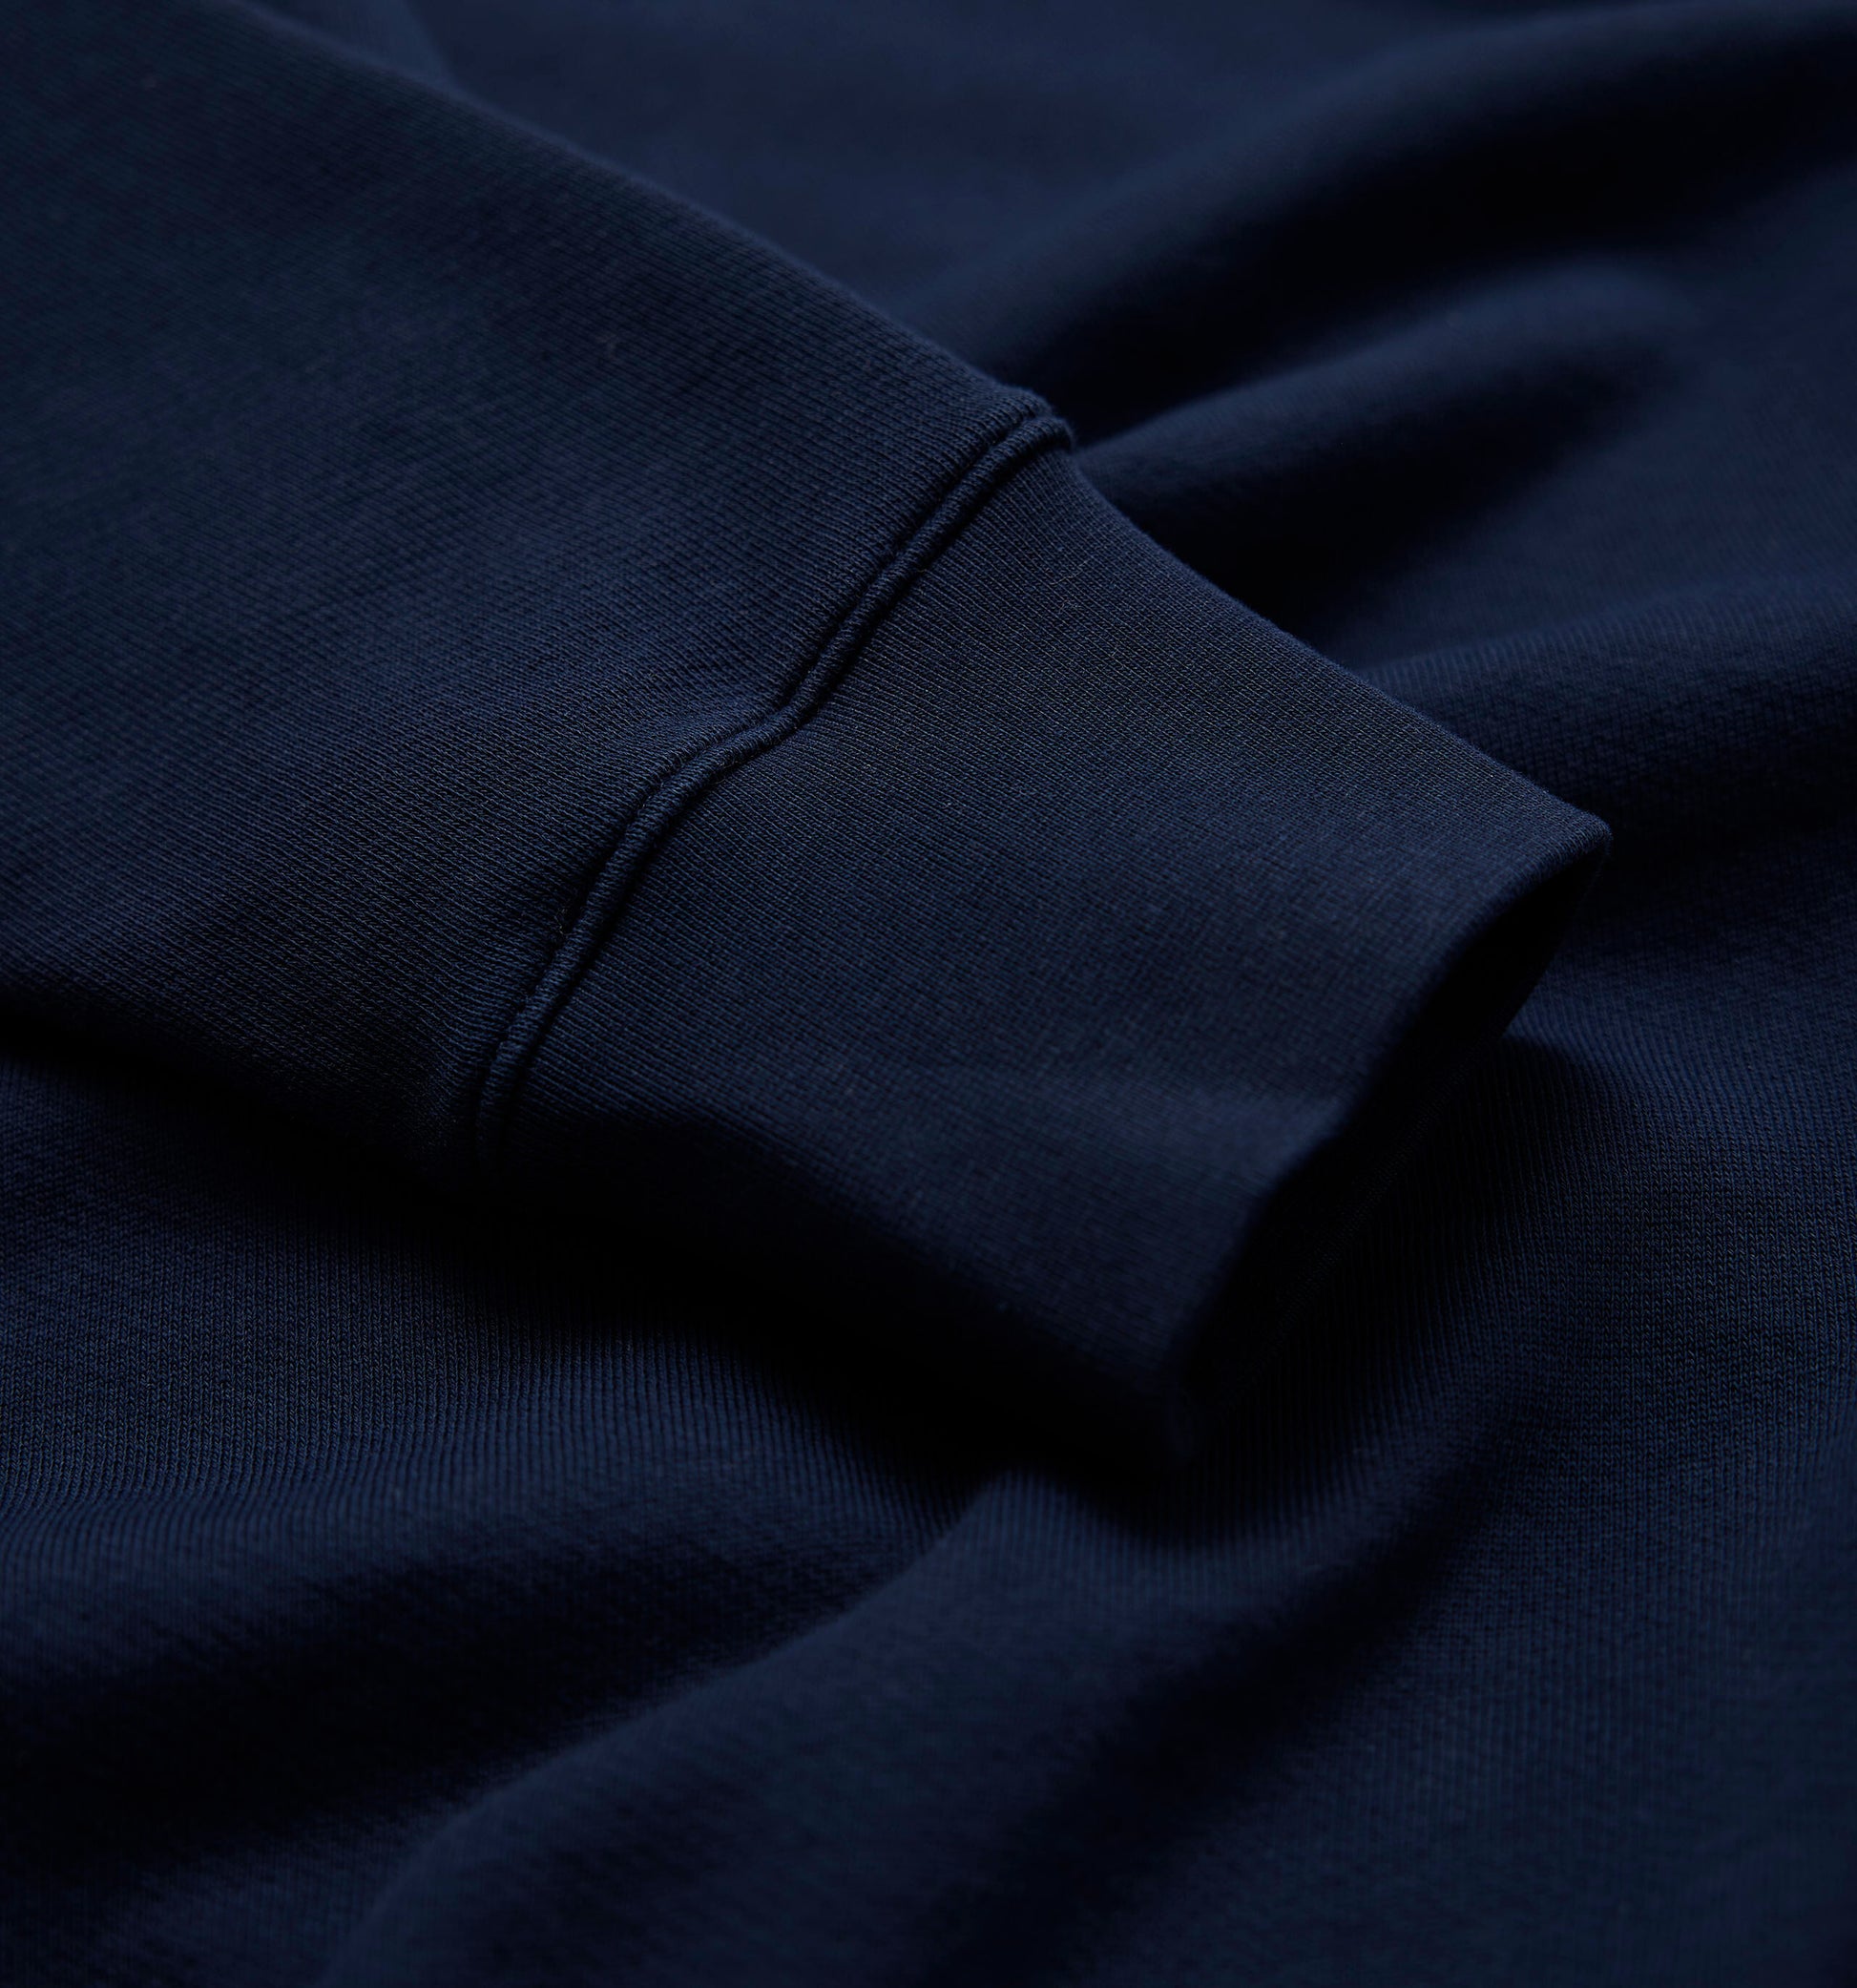 The George - French Terry Cotton Sweatshirt  In Navy From King Essentials